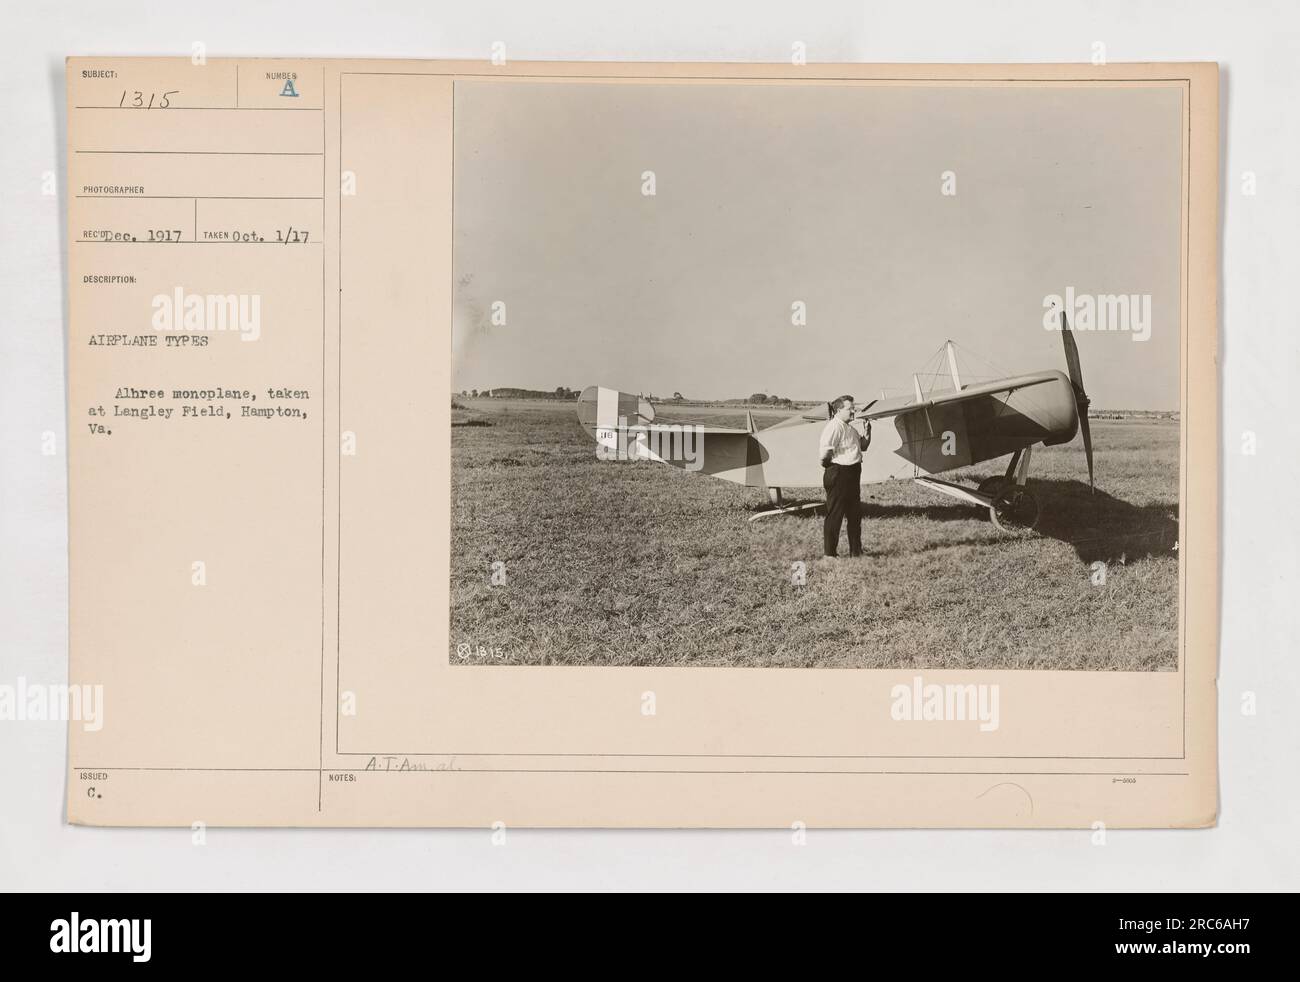 '111-SC-1315: Albree monoplane at Langley Field, Hampton, VA. Photograph taken on October 1, 1917. The image showcases C. A Albree's monoplane. (Submitted by A.T.A.)' Stock Photo